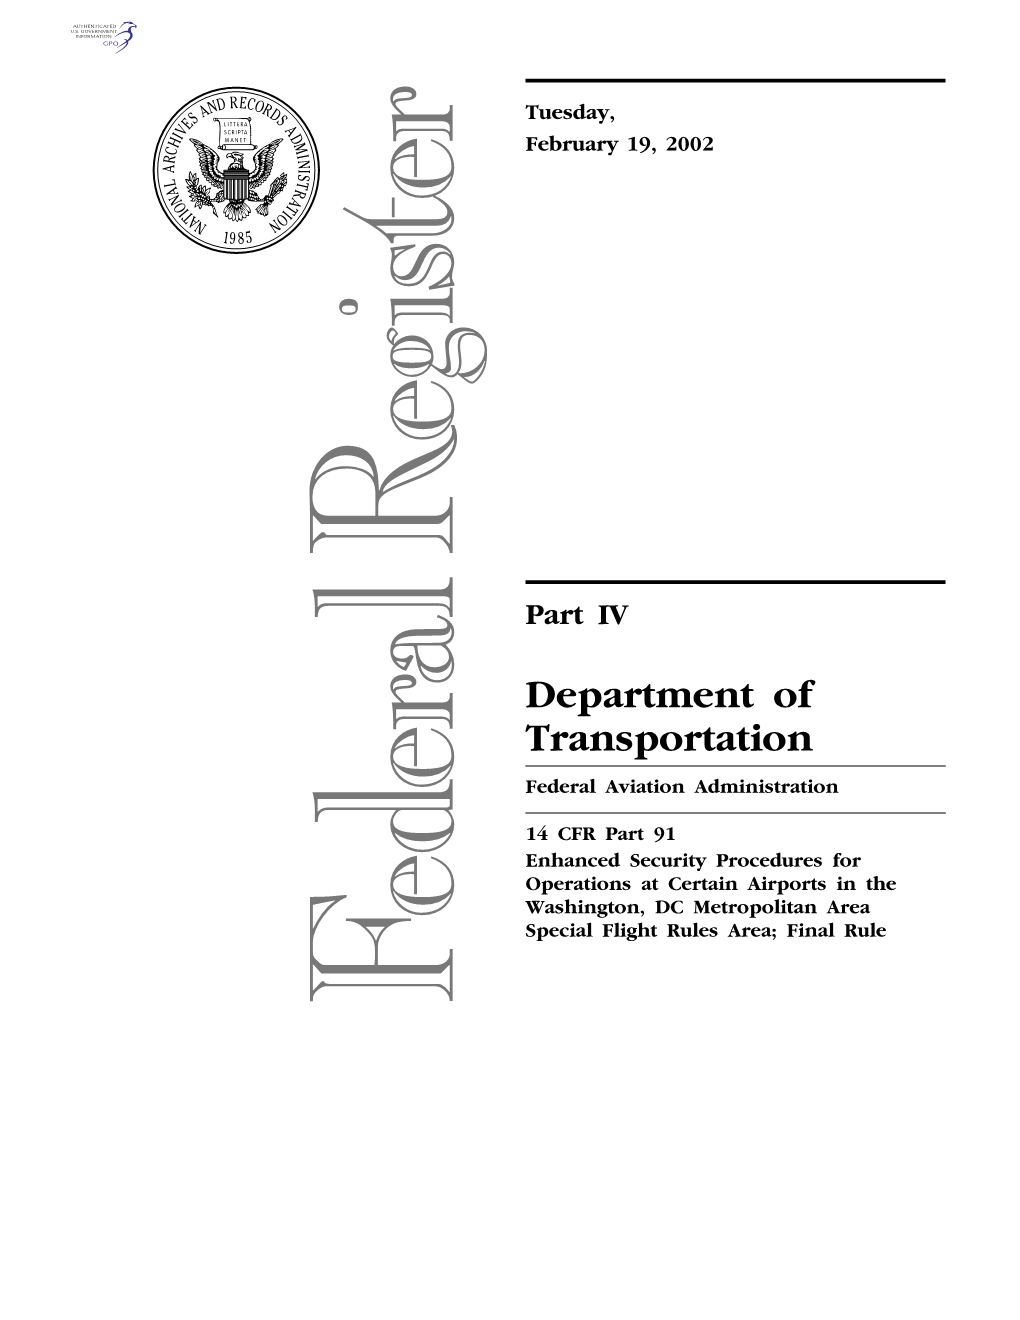 Department of Transportation Federal Aviation Administration